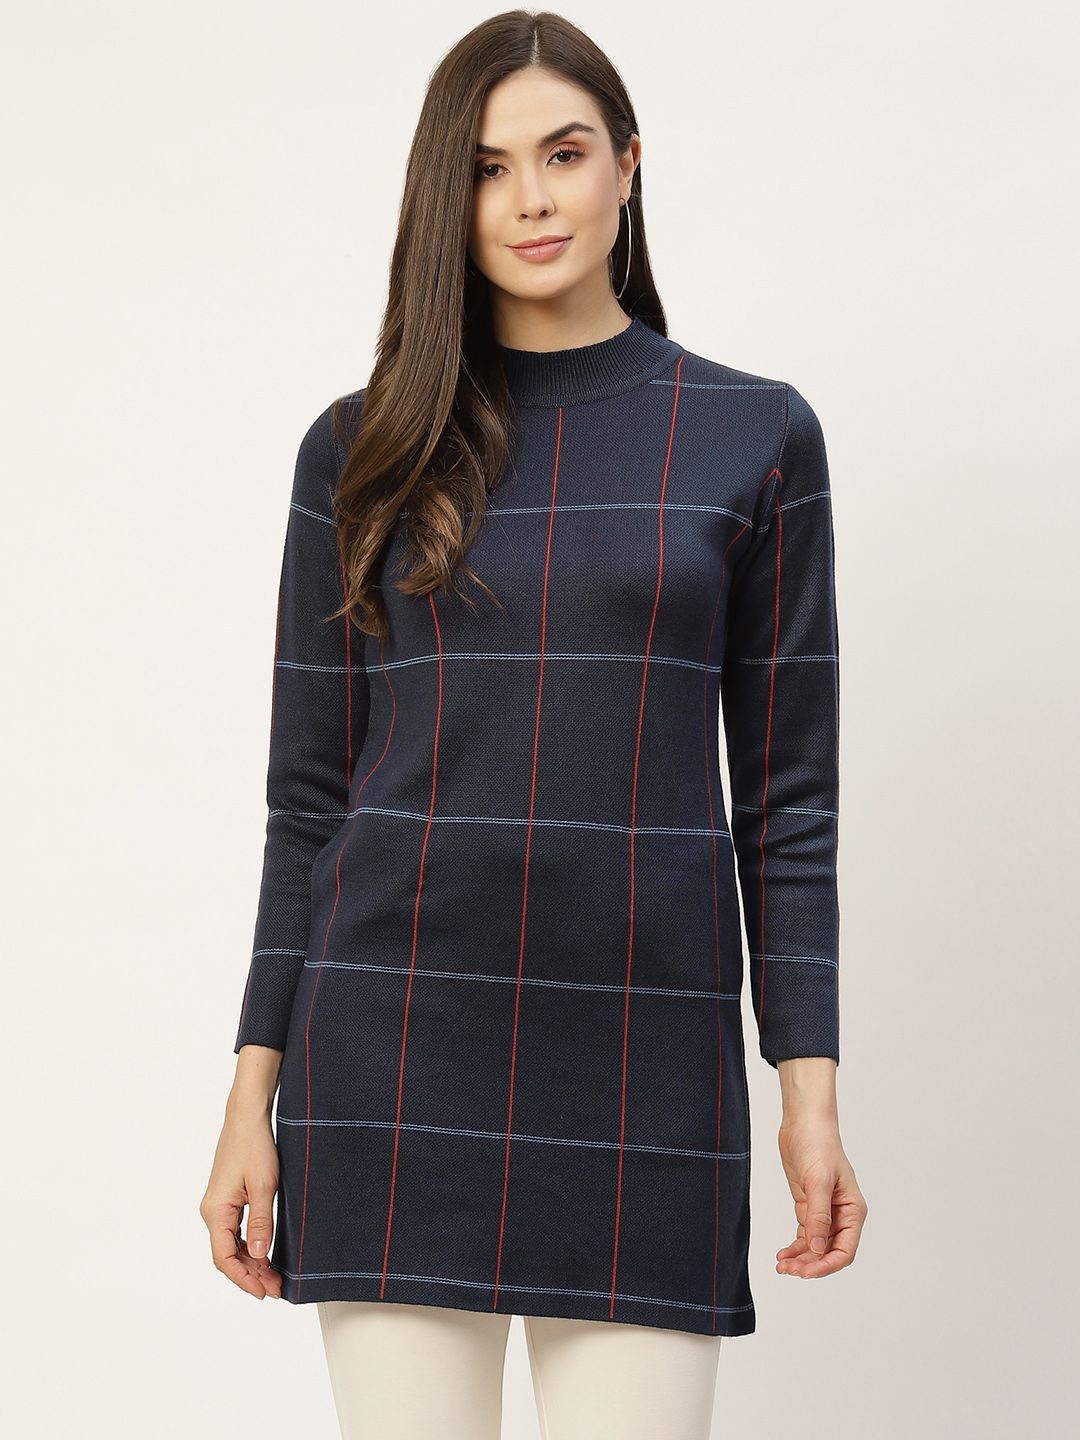 APSLEY Women Navy Blue & Red Checked Longline Pullover Price in India